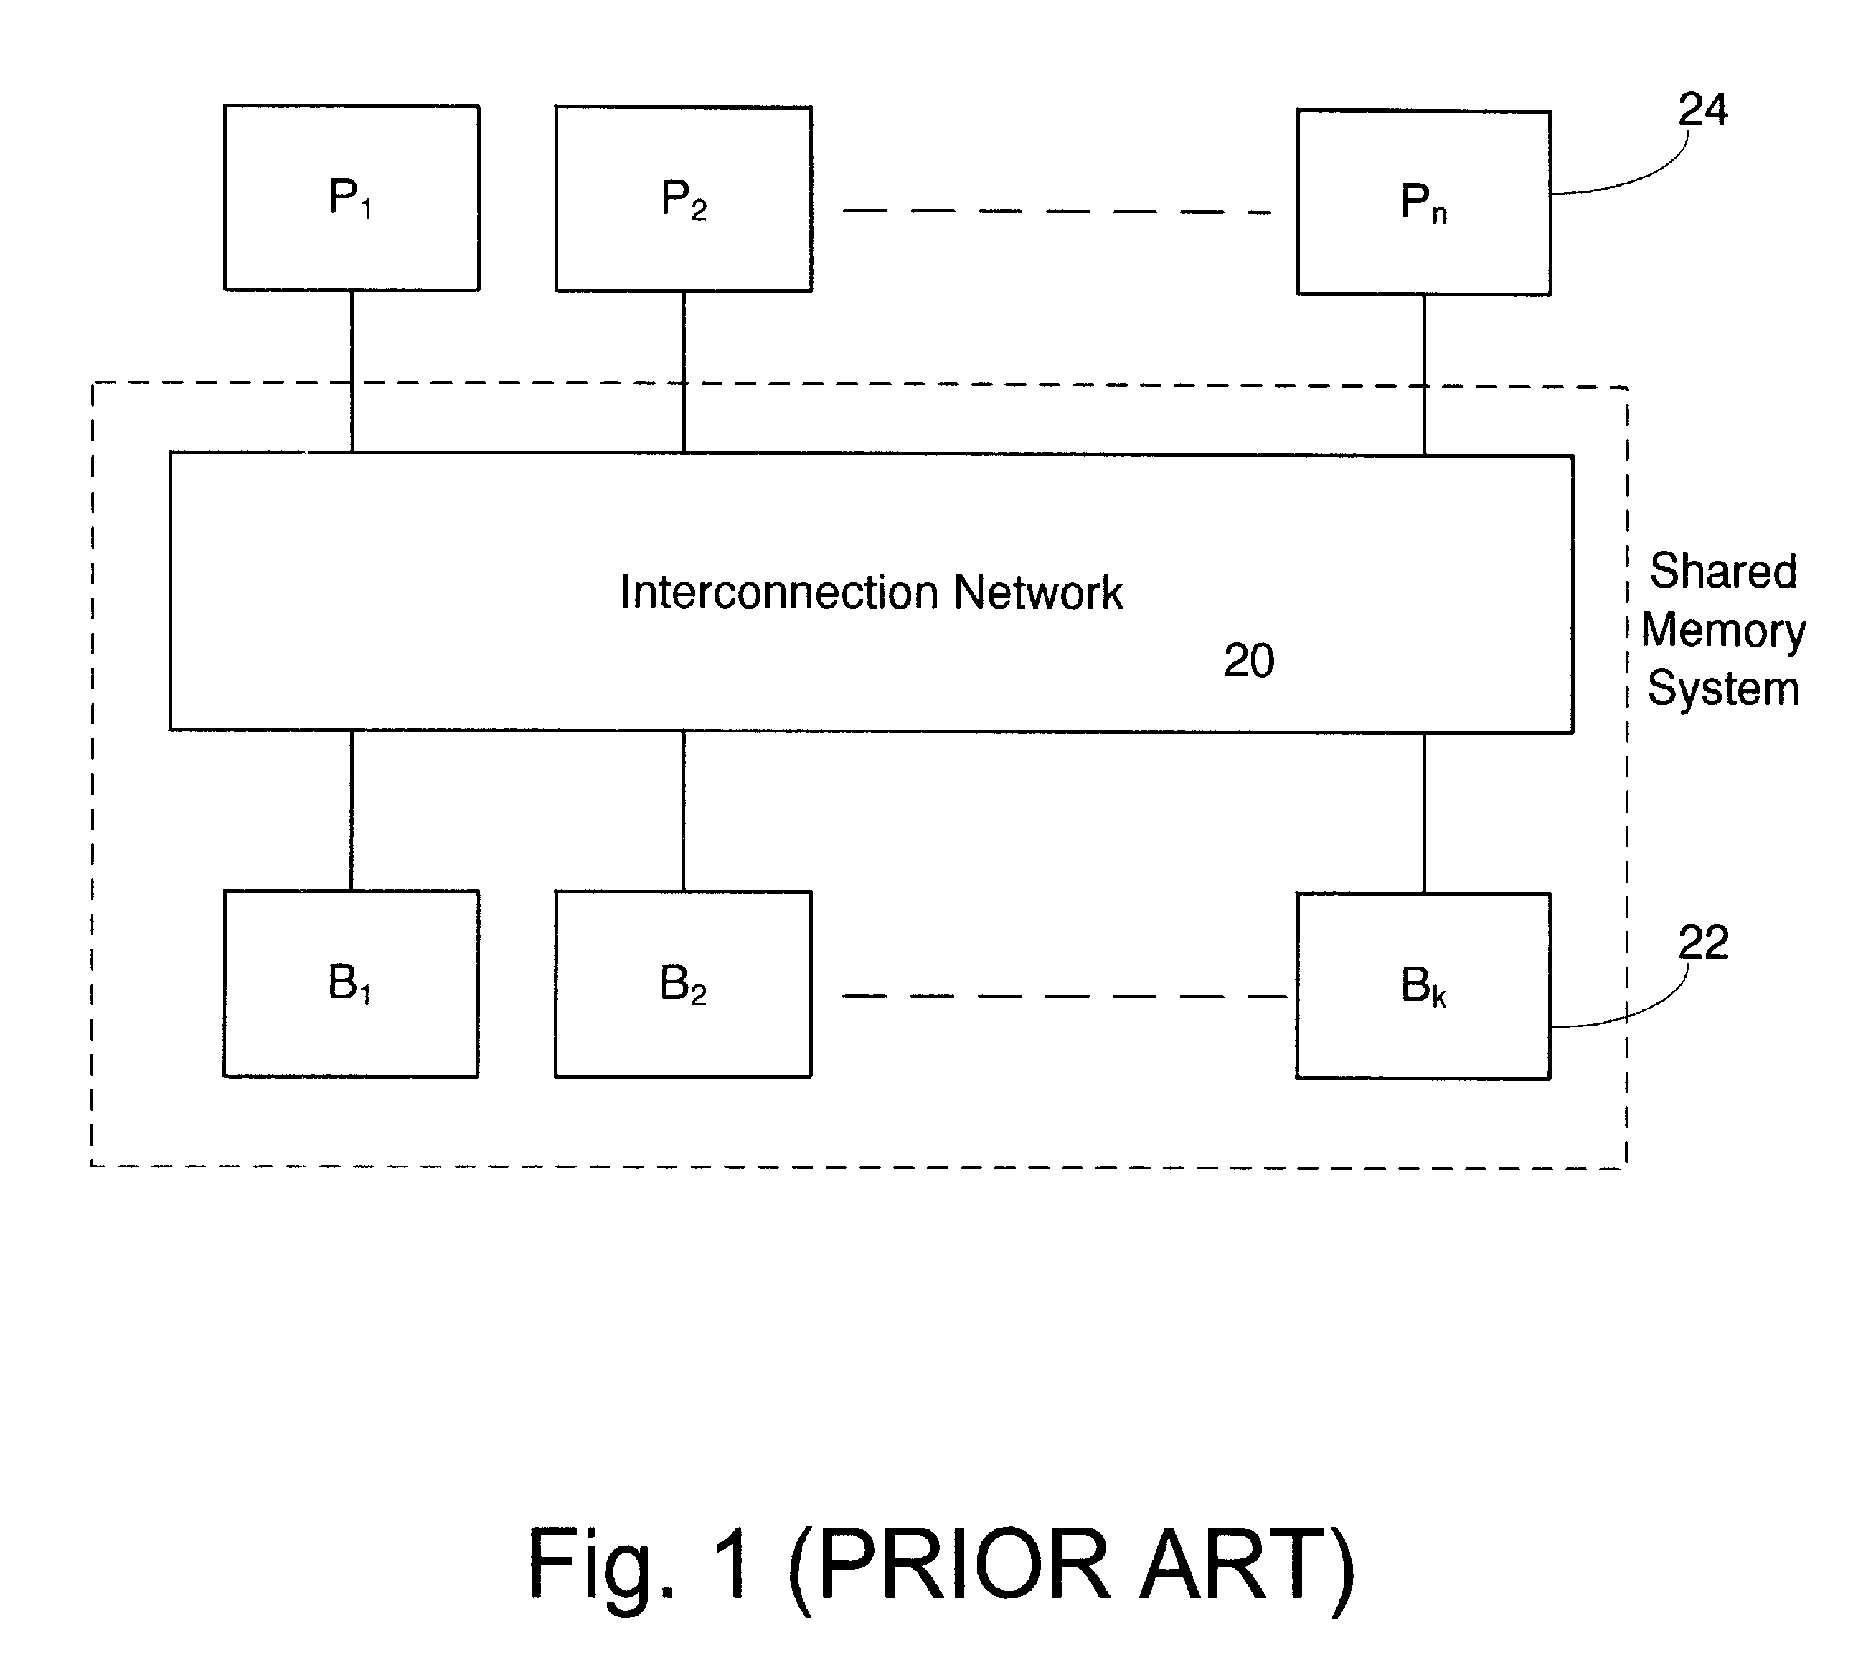 Shared memory system for a tightly-coupled multiprocessor